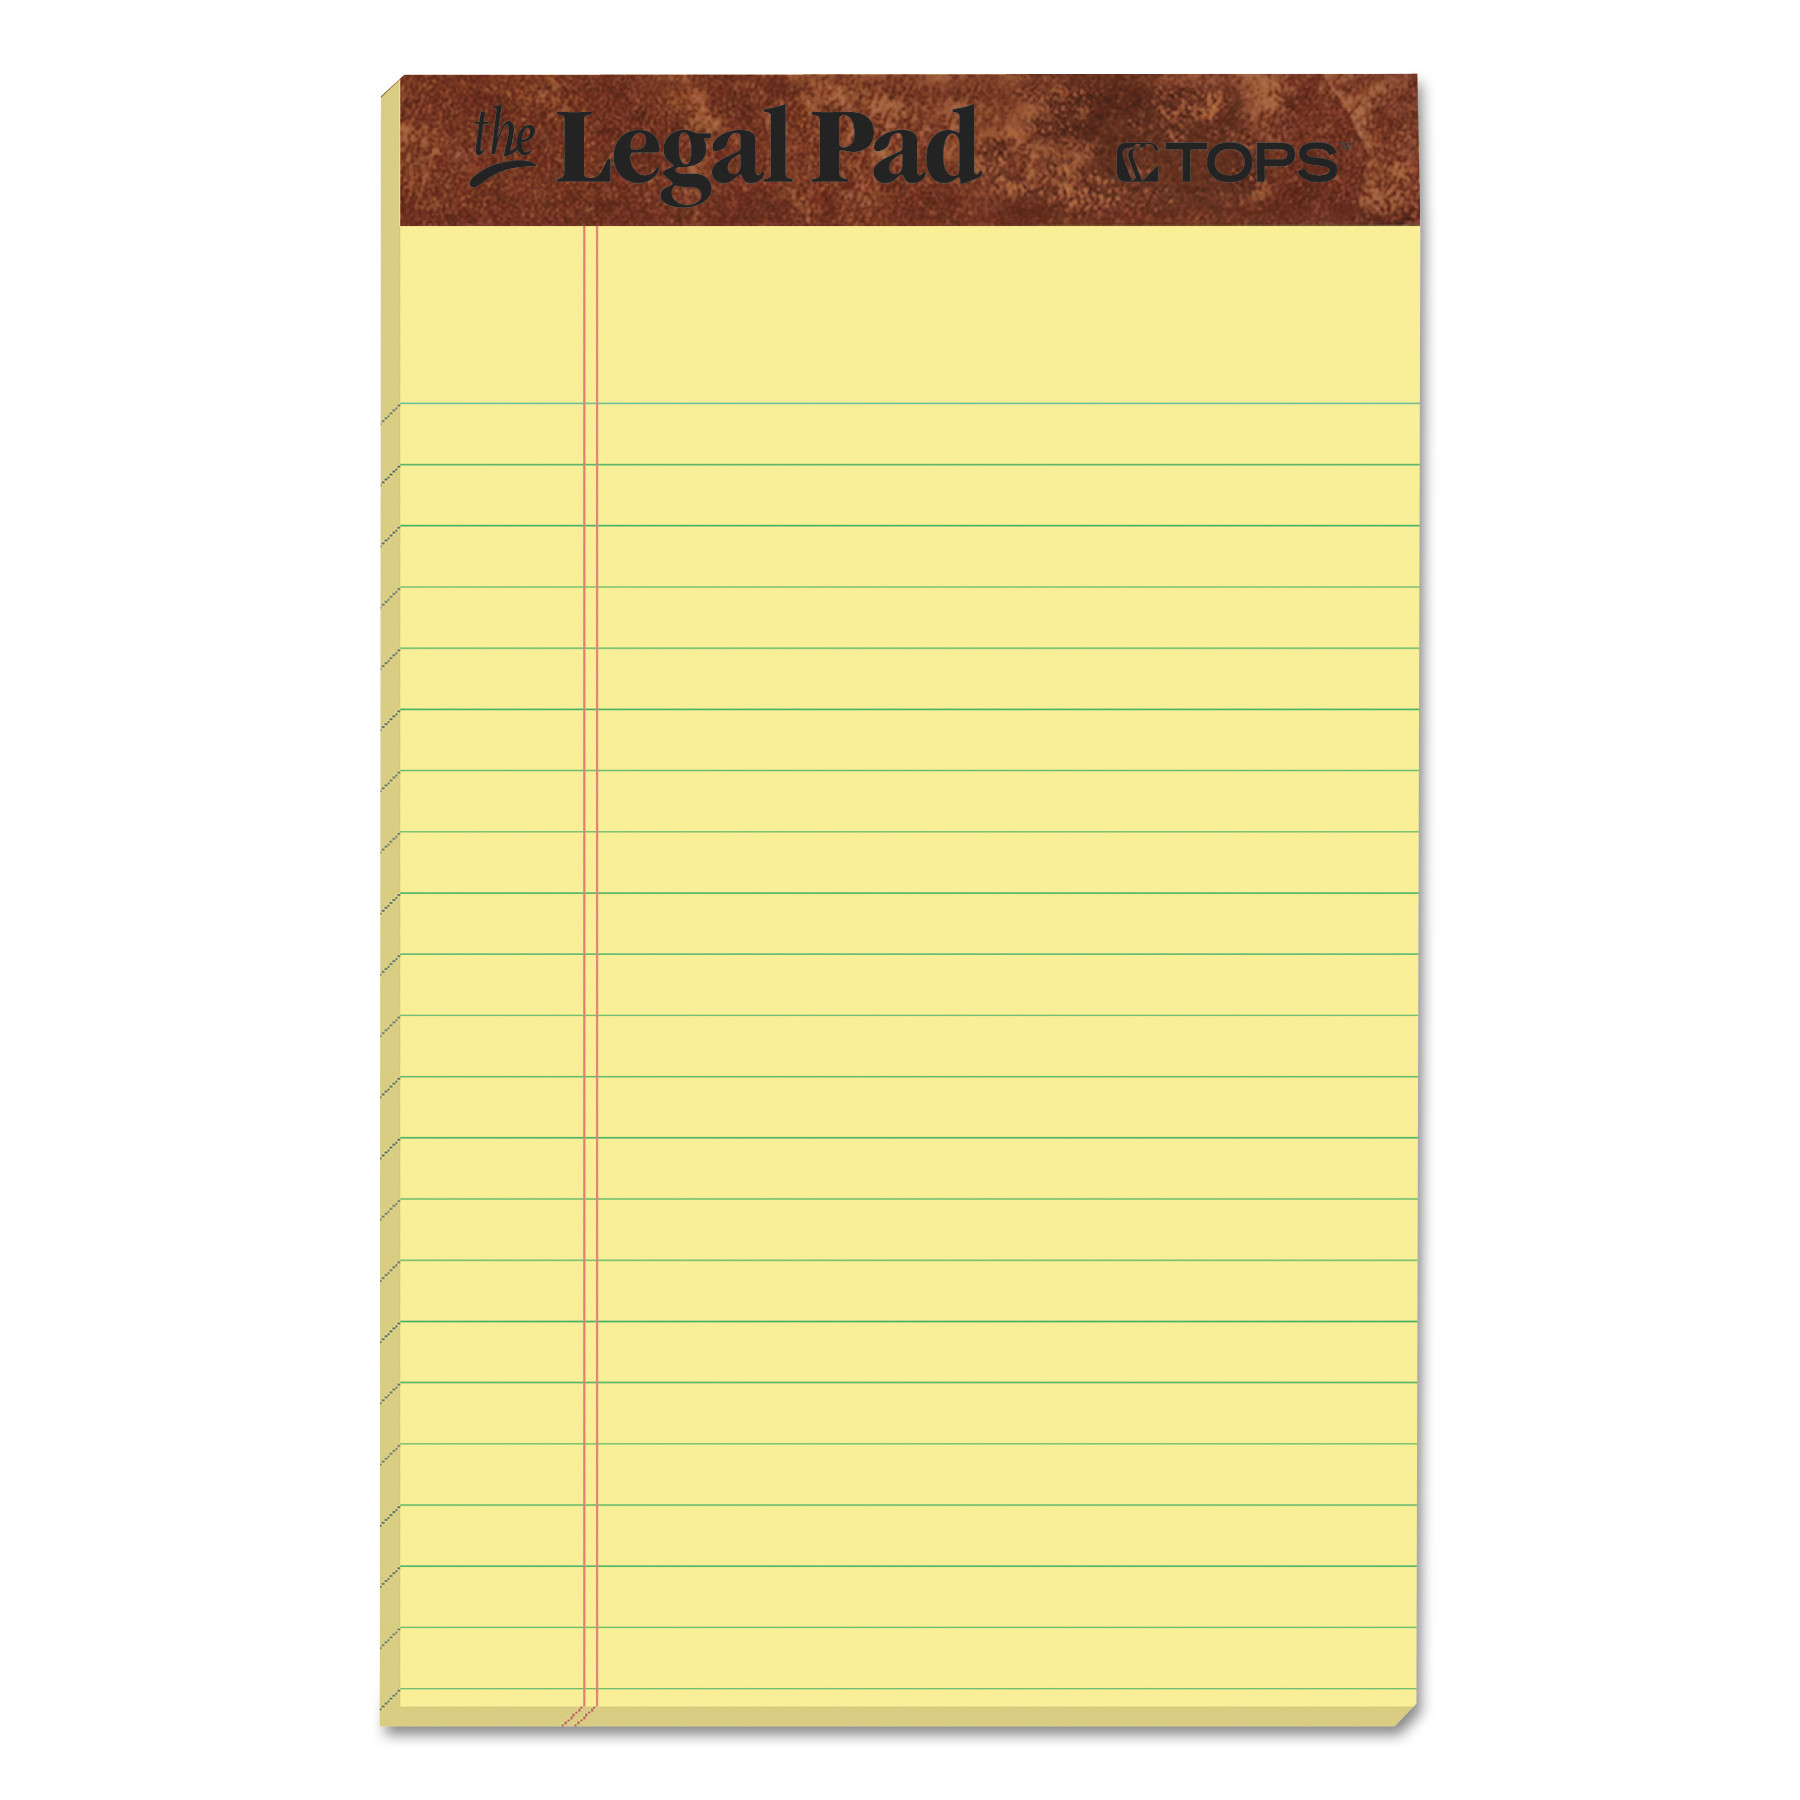 "The Legal Pad" Perforated Pads, Narrow Rule, 5 x 8, Canary, 50 Sheets, Dozen